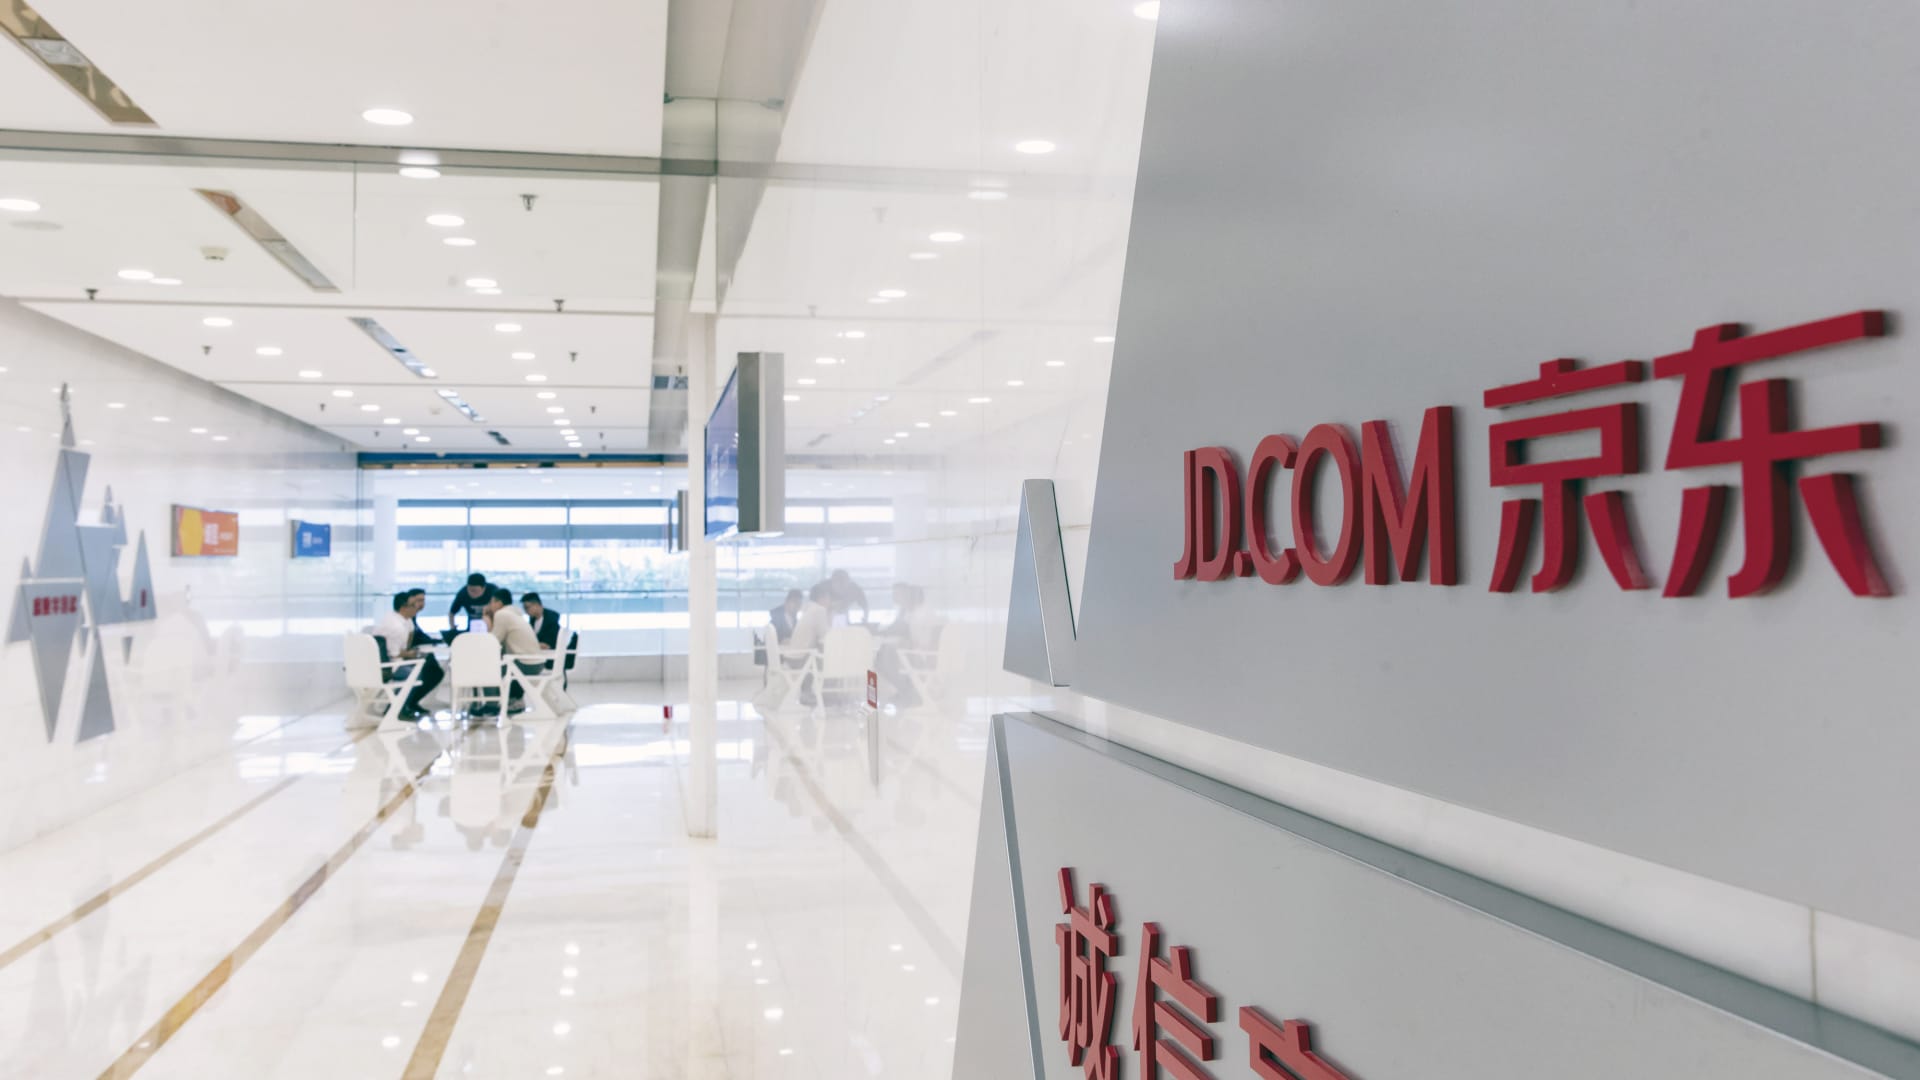 JD.com plans to launch an "industrial version" of a ChatGPT-like tool called ChatJD for retail and finance, after Alibaba's and Baidu's chatbot announcements (Arjun Kharpal/CNBC)